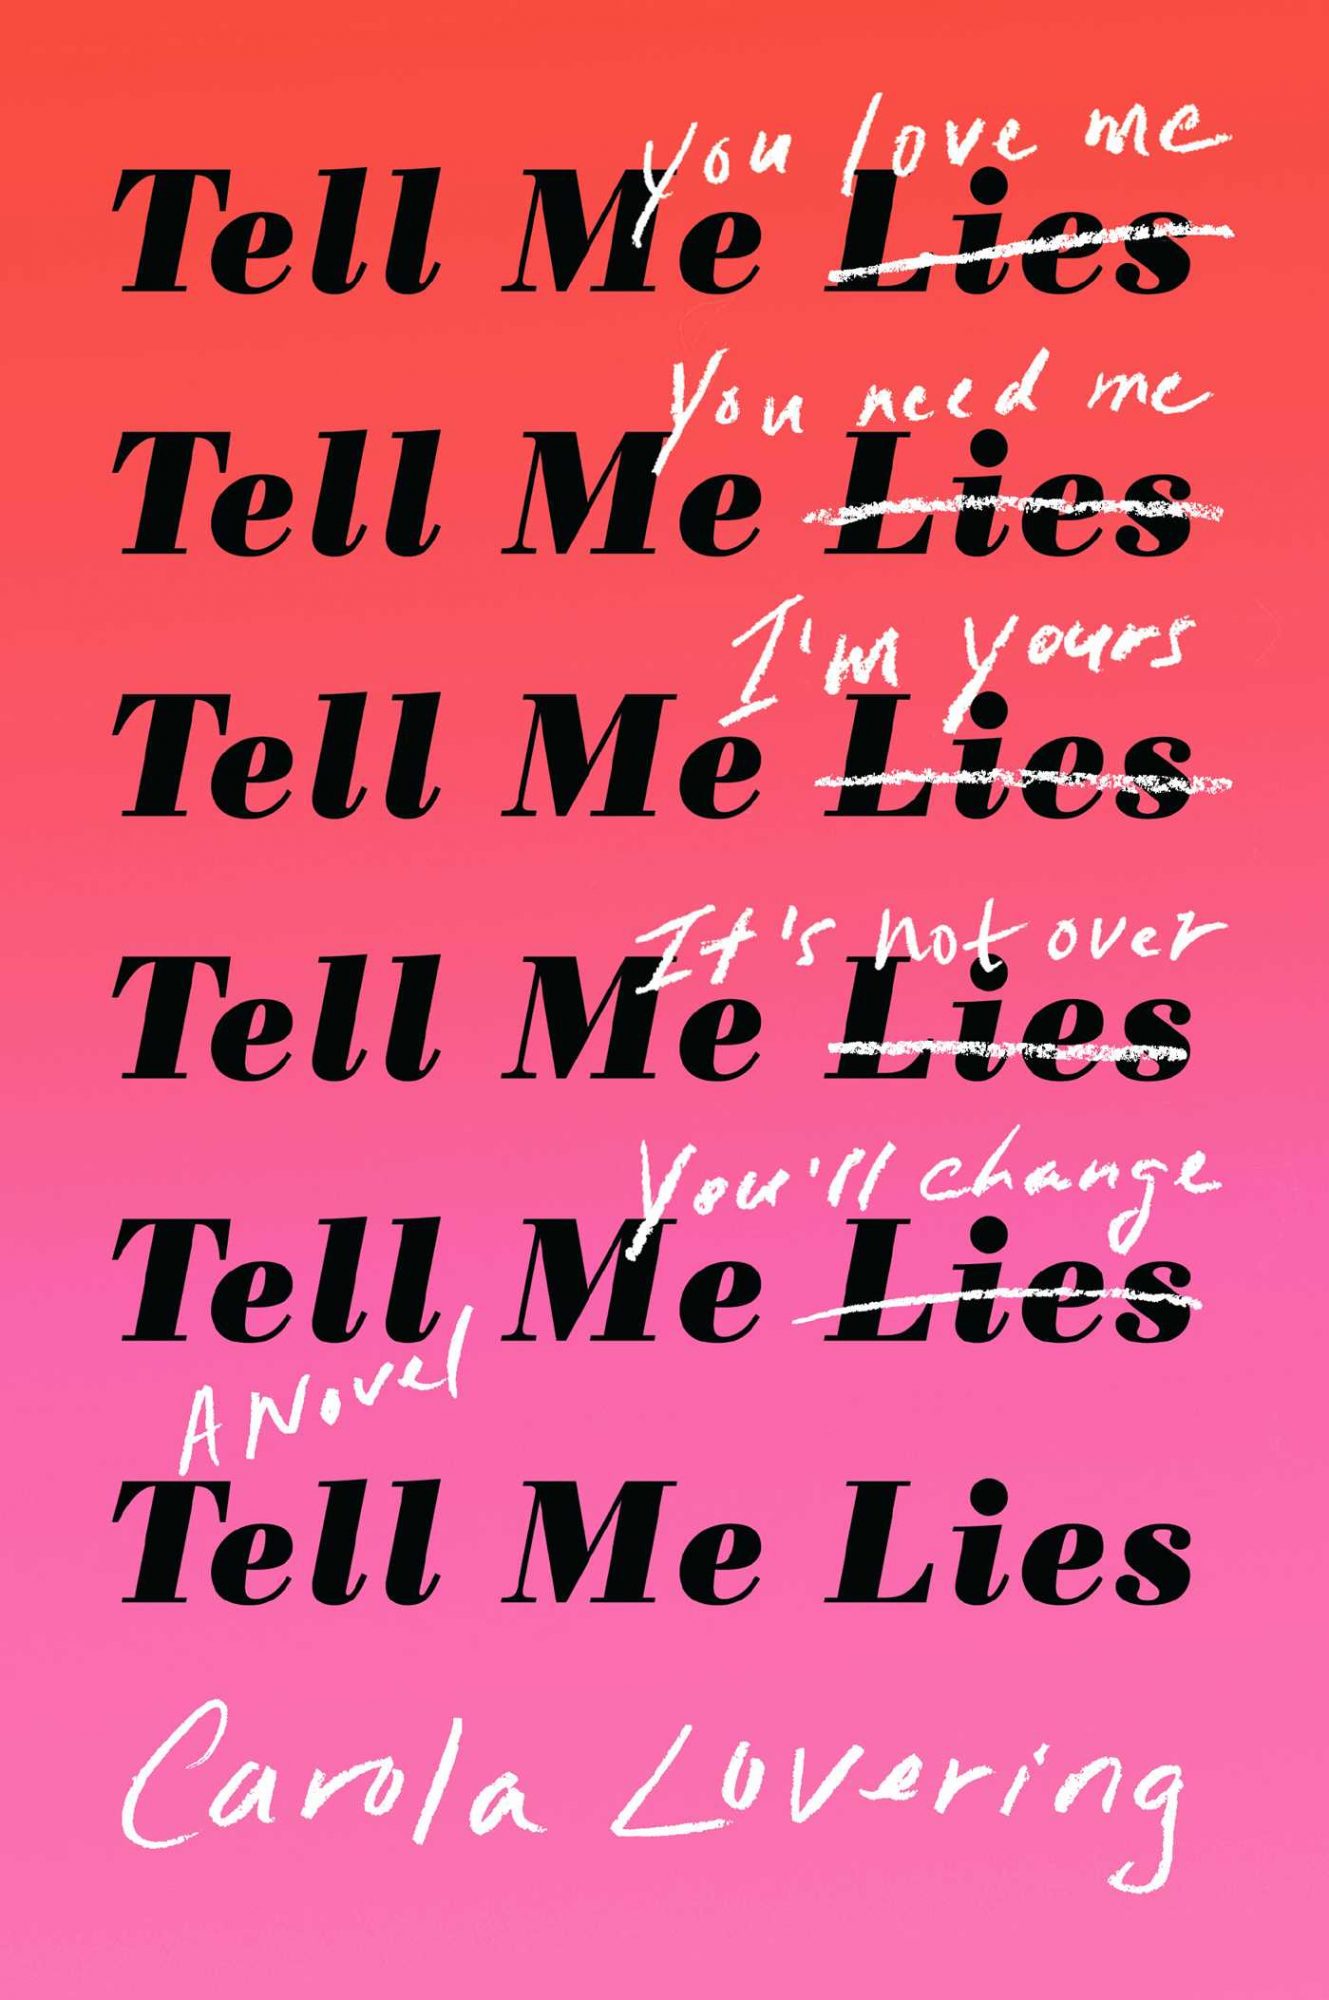 picture-of-tell-me-lies-book-photo.jpg